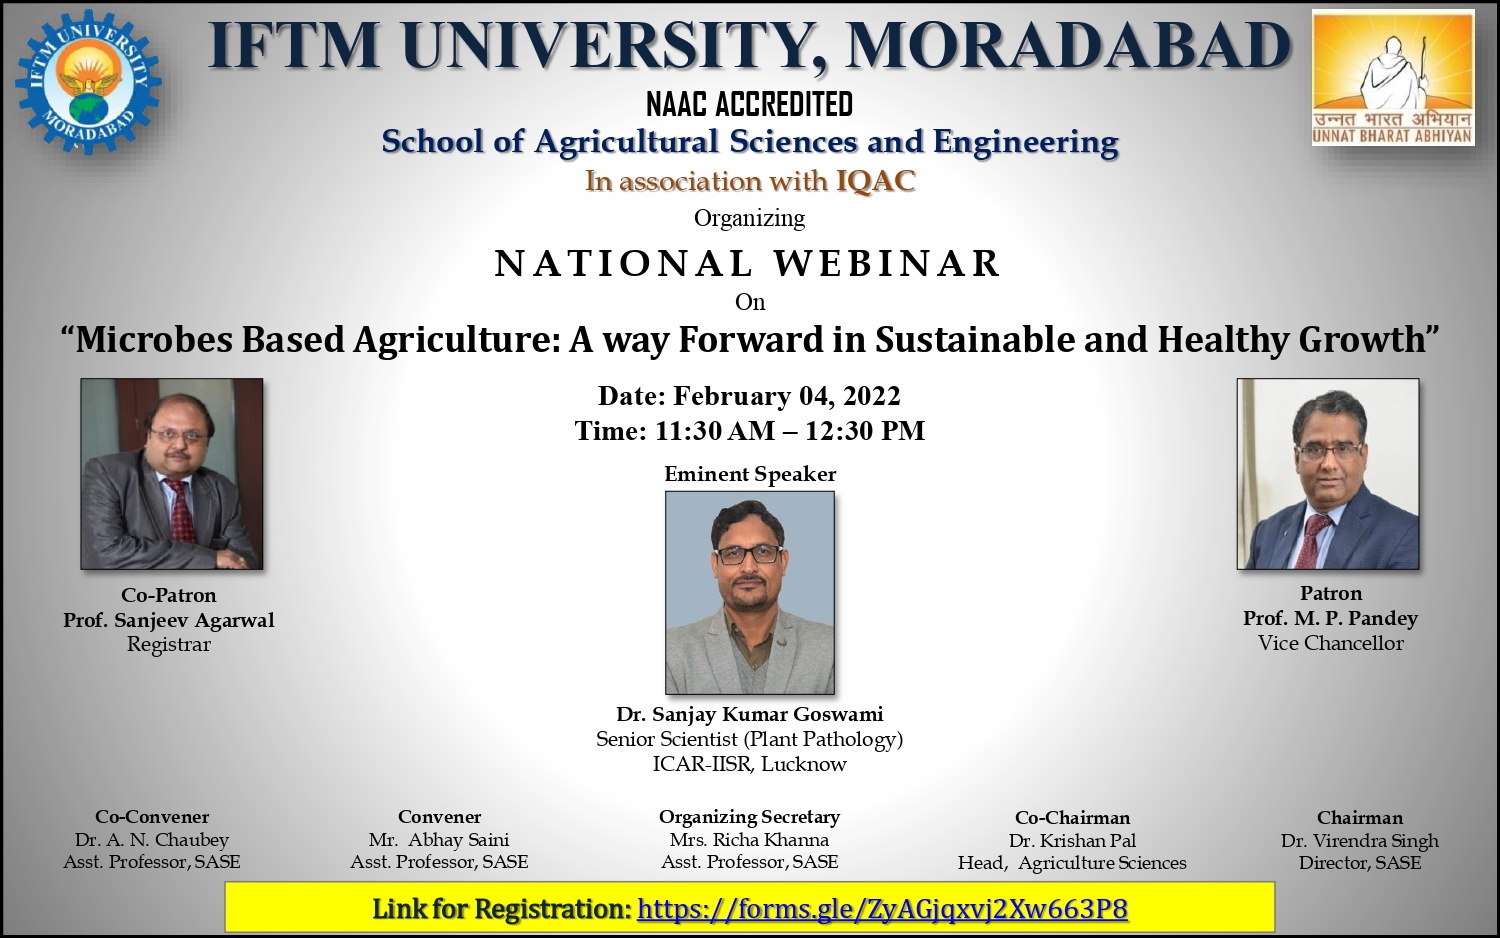 Webinar on “Microbes Based Agriculture A way Forward in Sustainable and Healthy Growth”